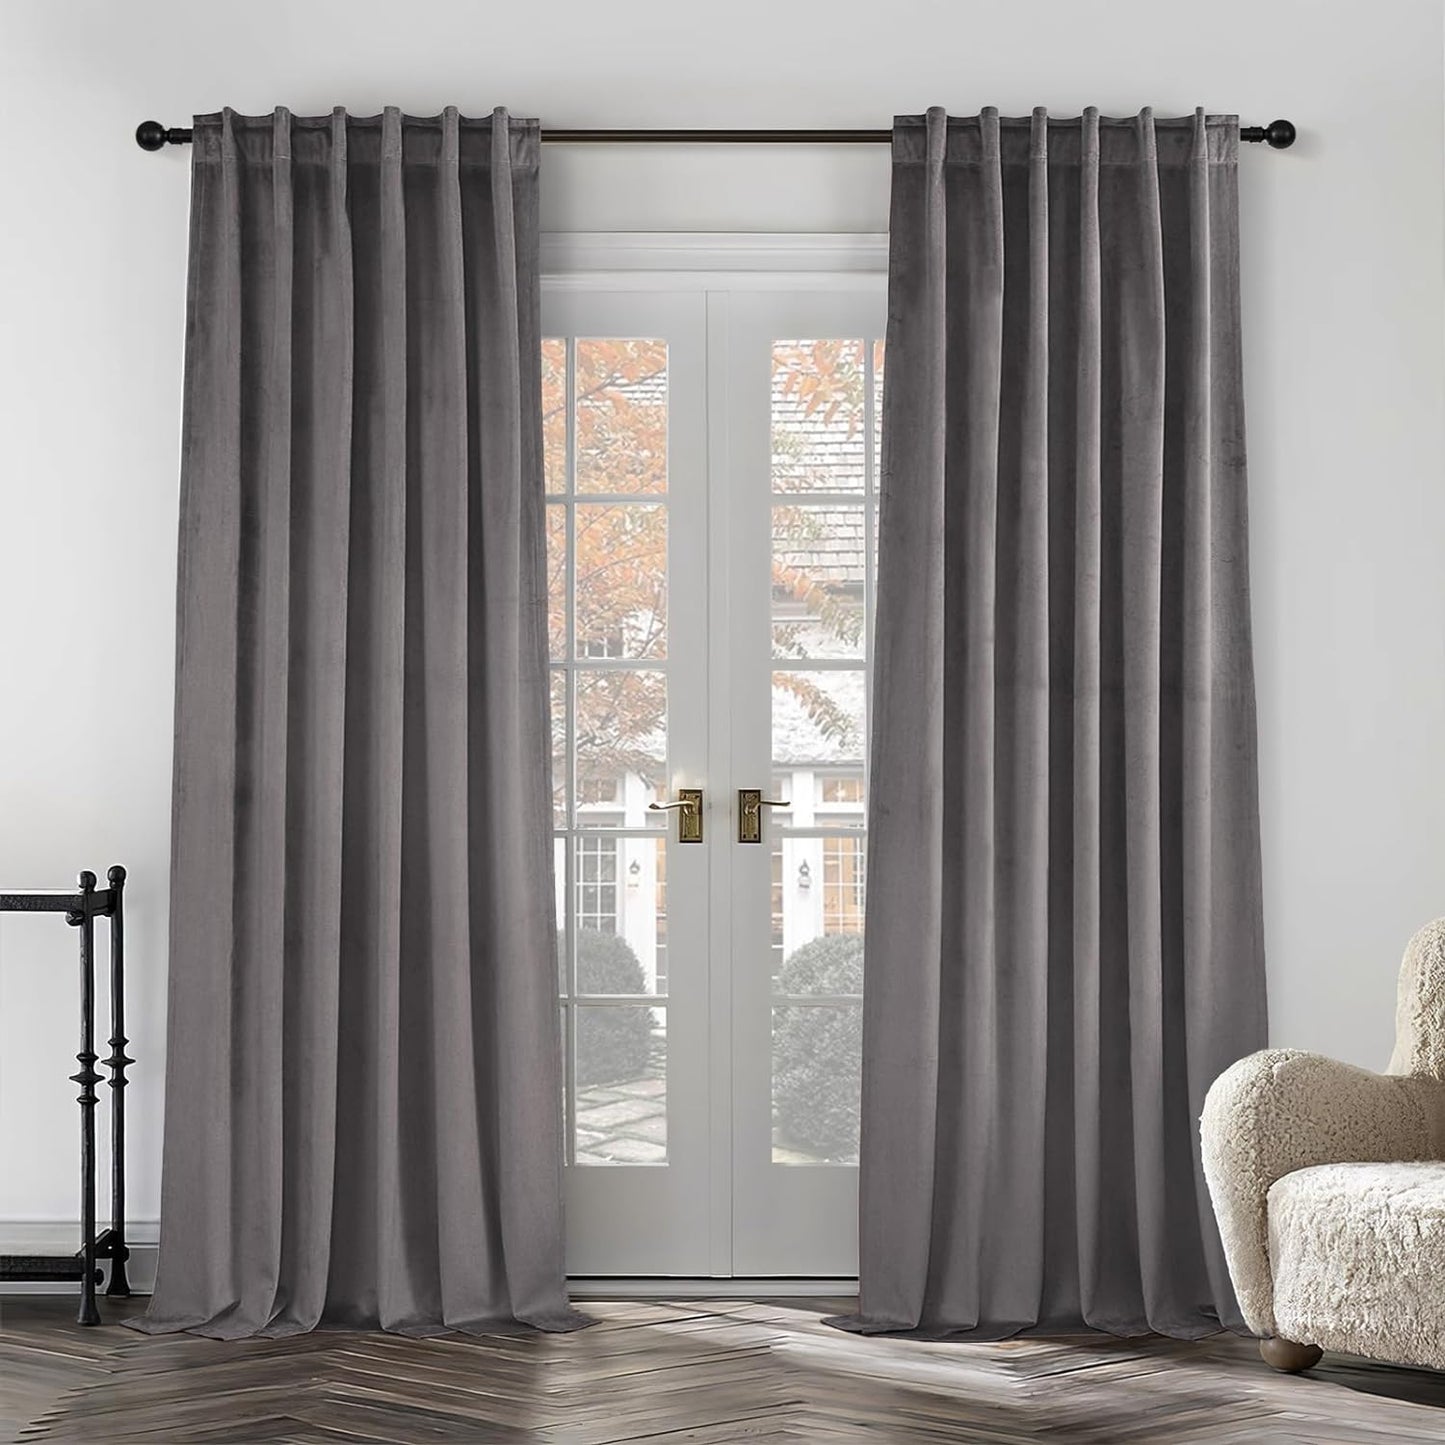 Topfinel Olive Green Velvet Curtains 84 Inches Long for Living Room,Blackout Thermal Insulated Curtains for Bedroom,Back Tab Modern Window Treatment for Living Room,52X84 Inch Length,Olive Green  Top Fine Grey 52" X 96" 